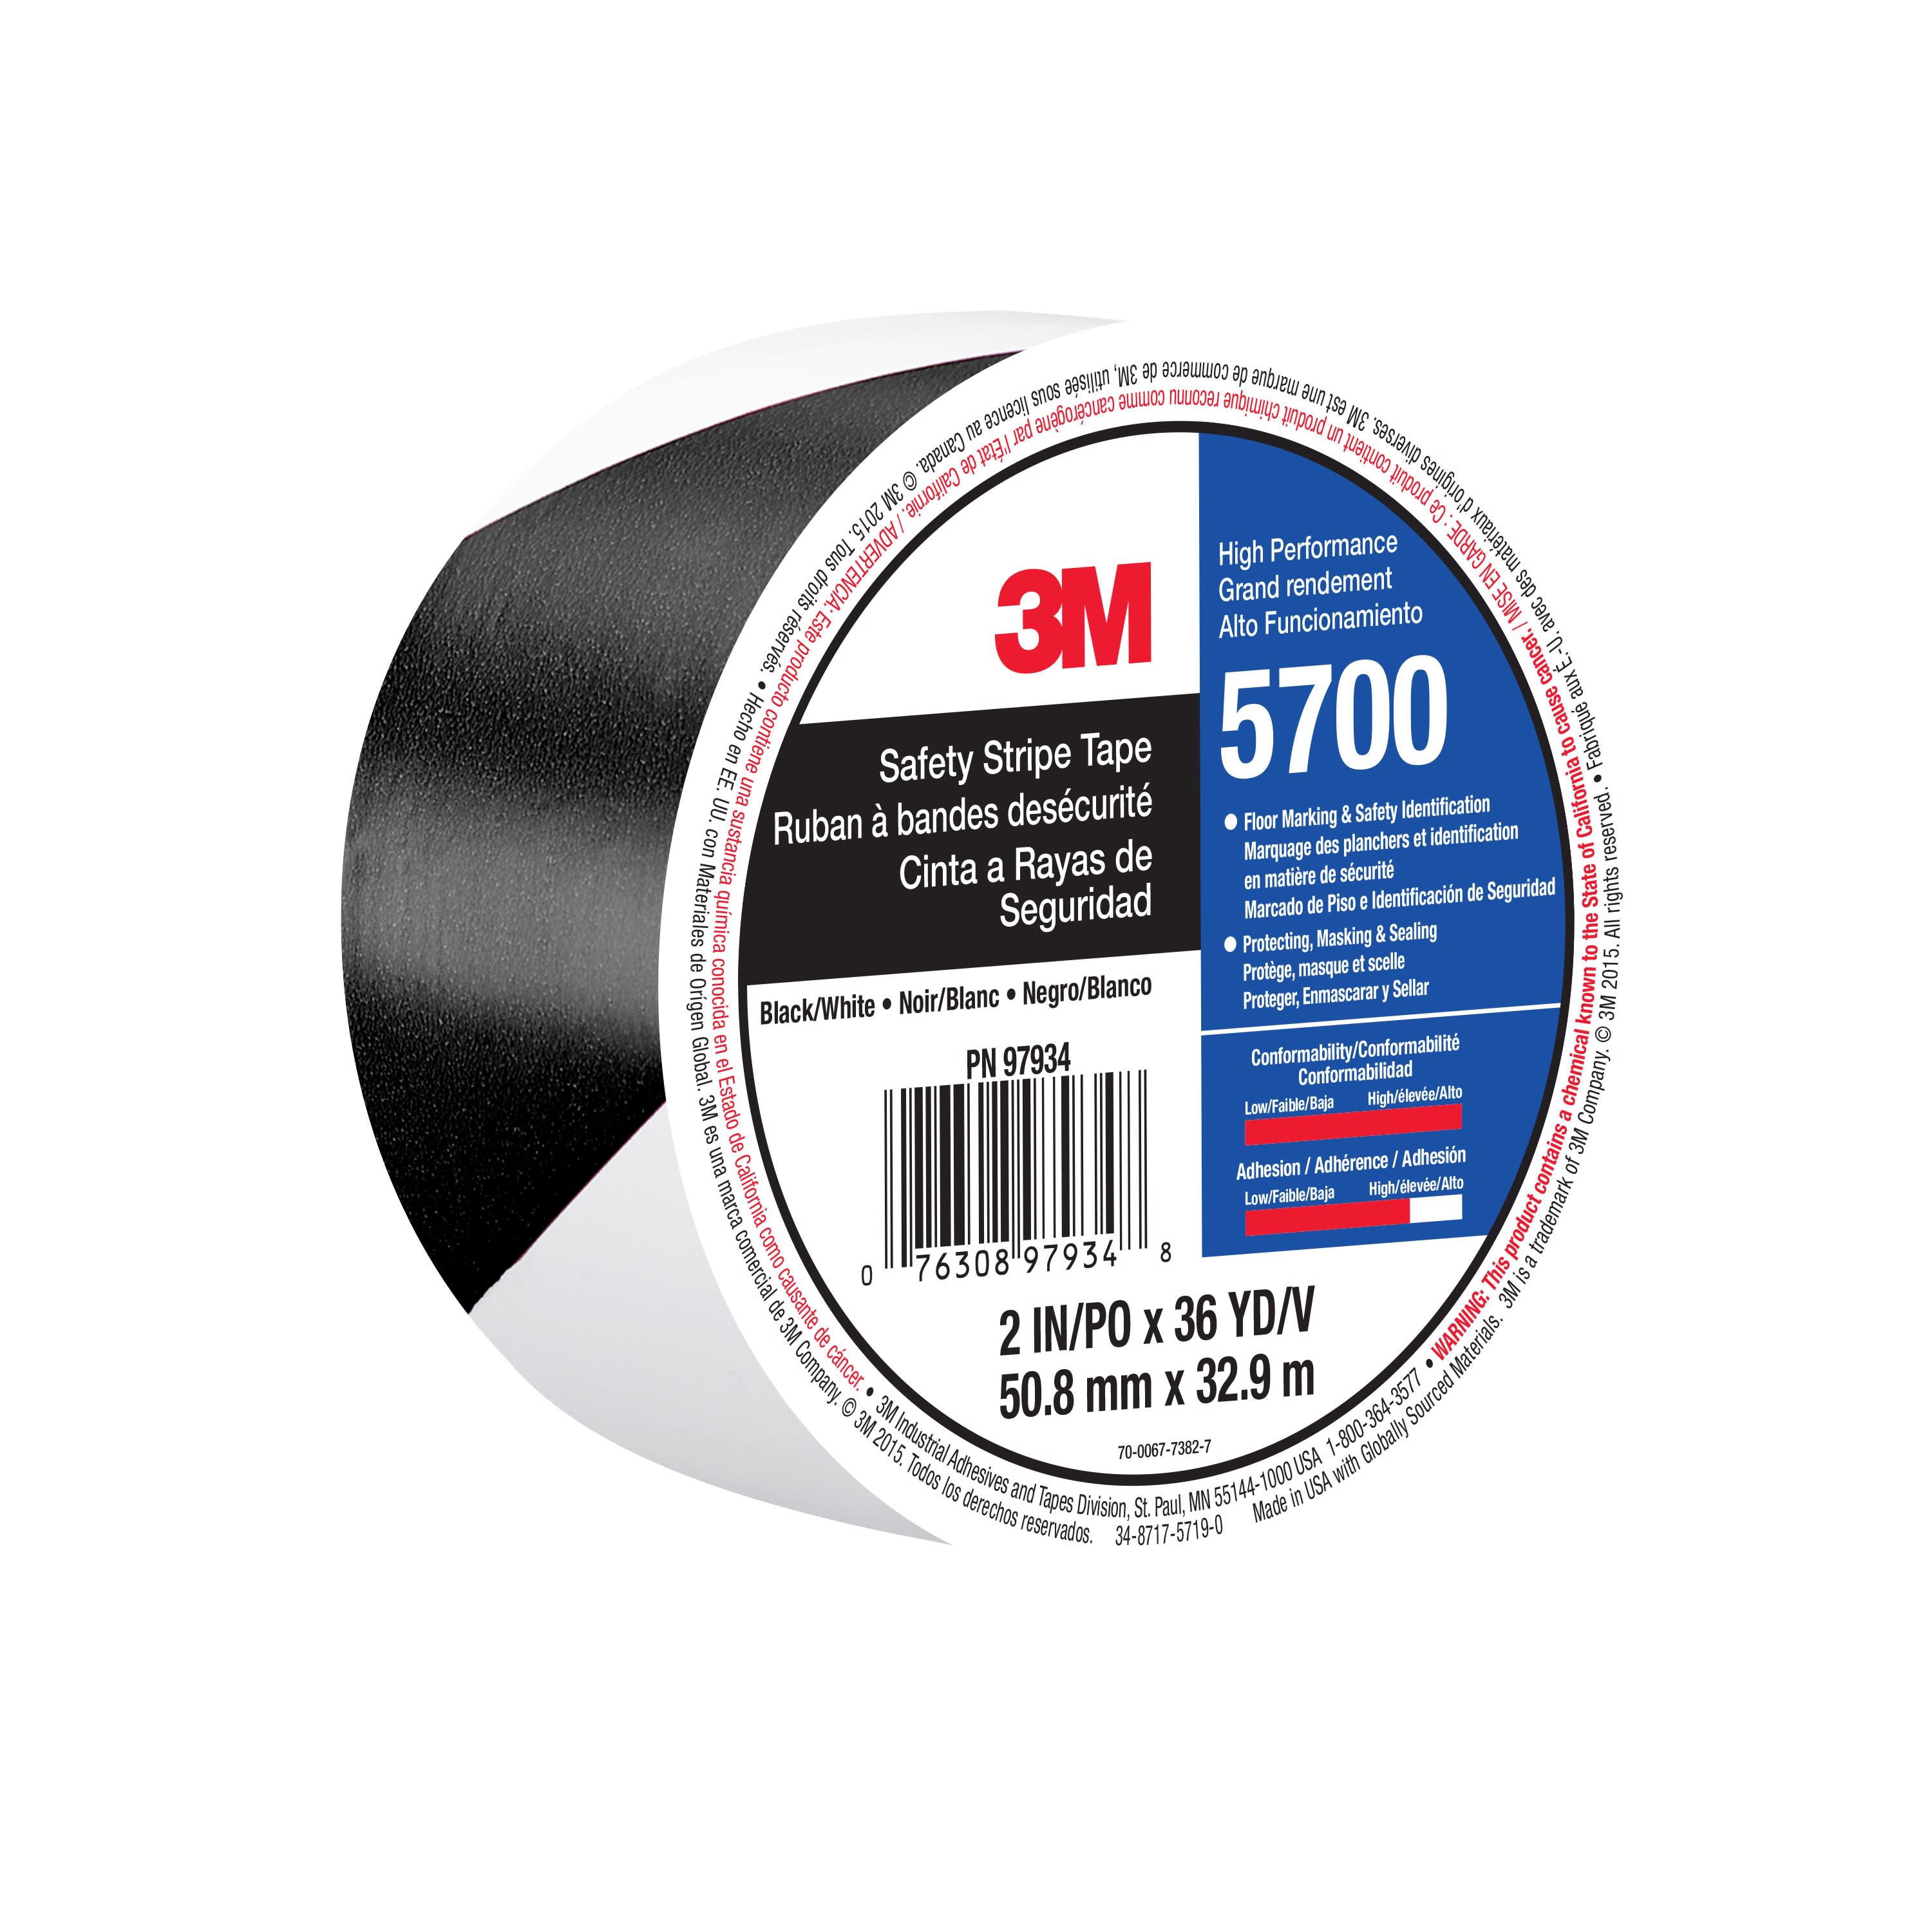 3M™ Safety Stripe Vinyl Tape 5700, Black/White, 2 in x 36 yd, 5.4 mil, 24 Roll/Case, Individually Wrapped Conveniently Packaged